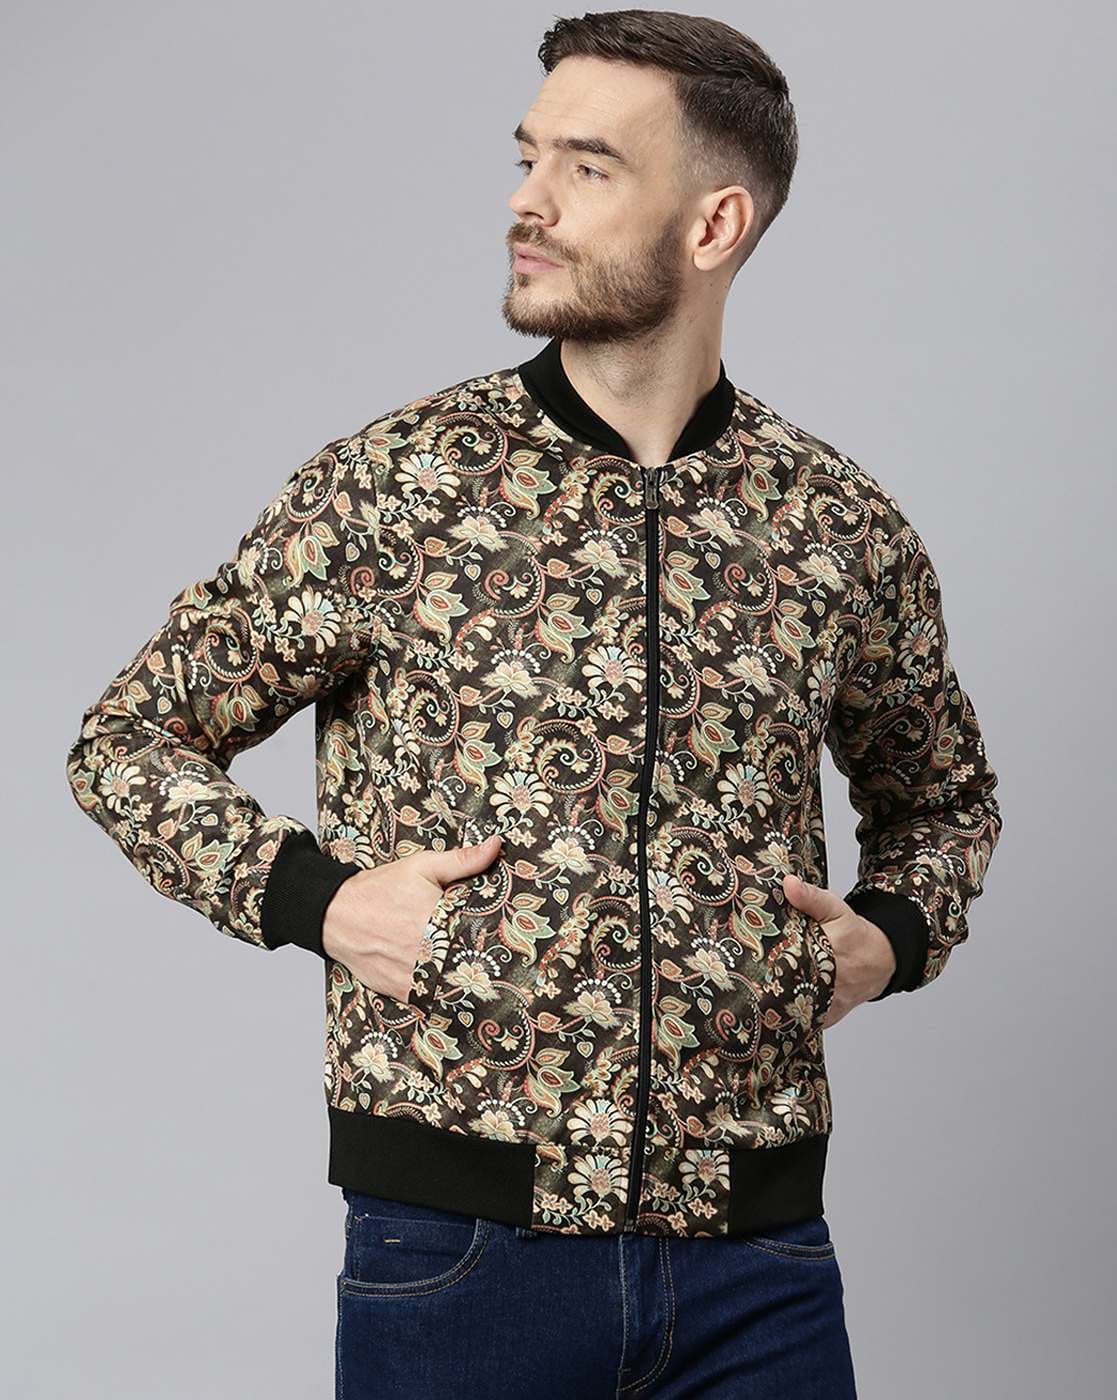 Mens Blazers Men Clothing Mens Blazer Print Jacket Stylish Fancy Floral  Males Suits Blazers With High Quality1299B From Kenneth333, $15.39 |  DHgate.Com